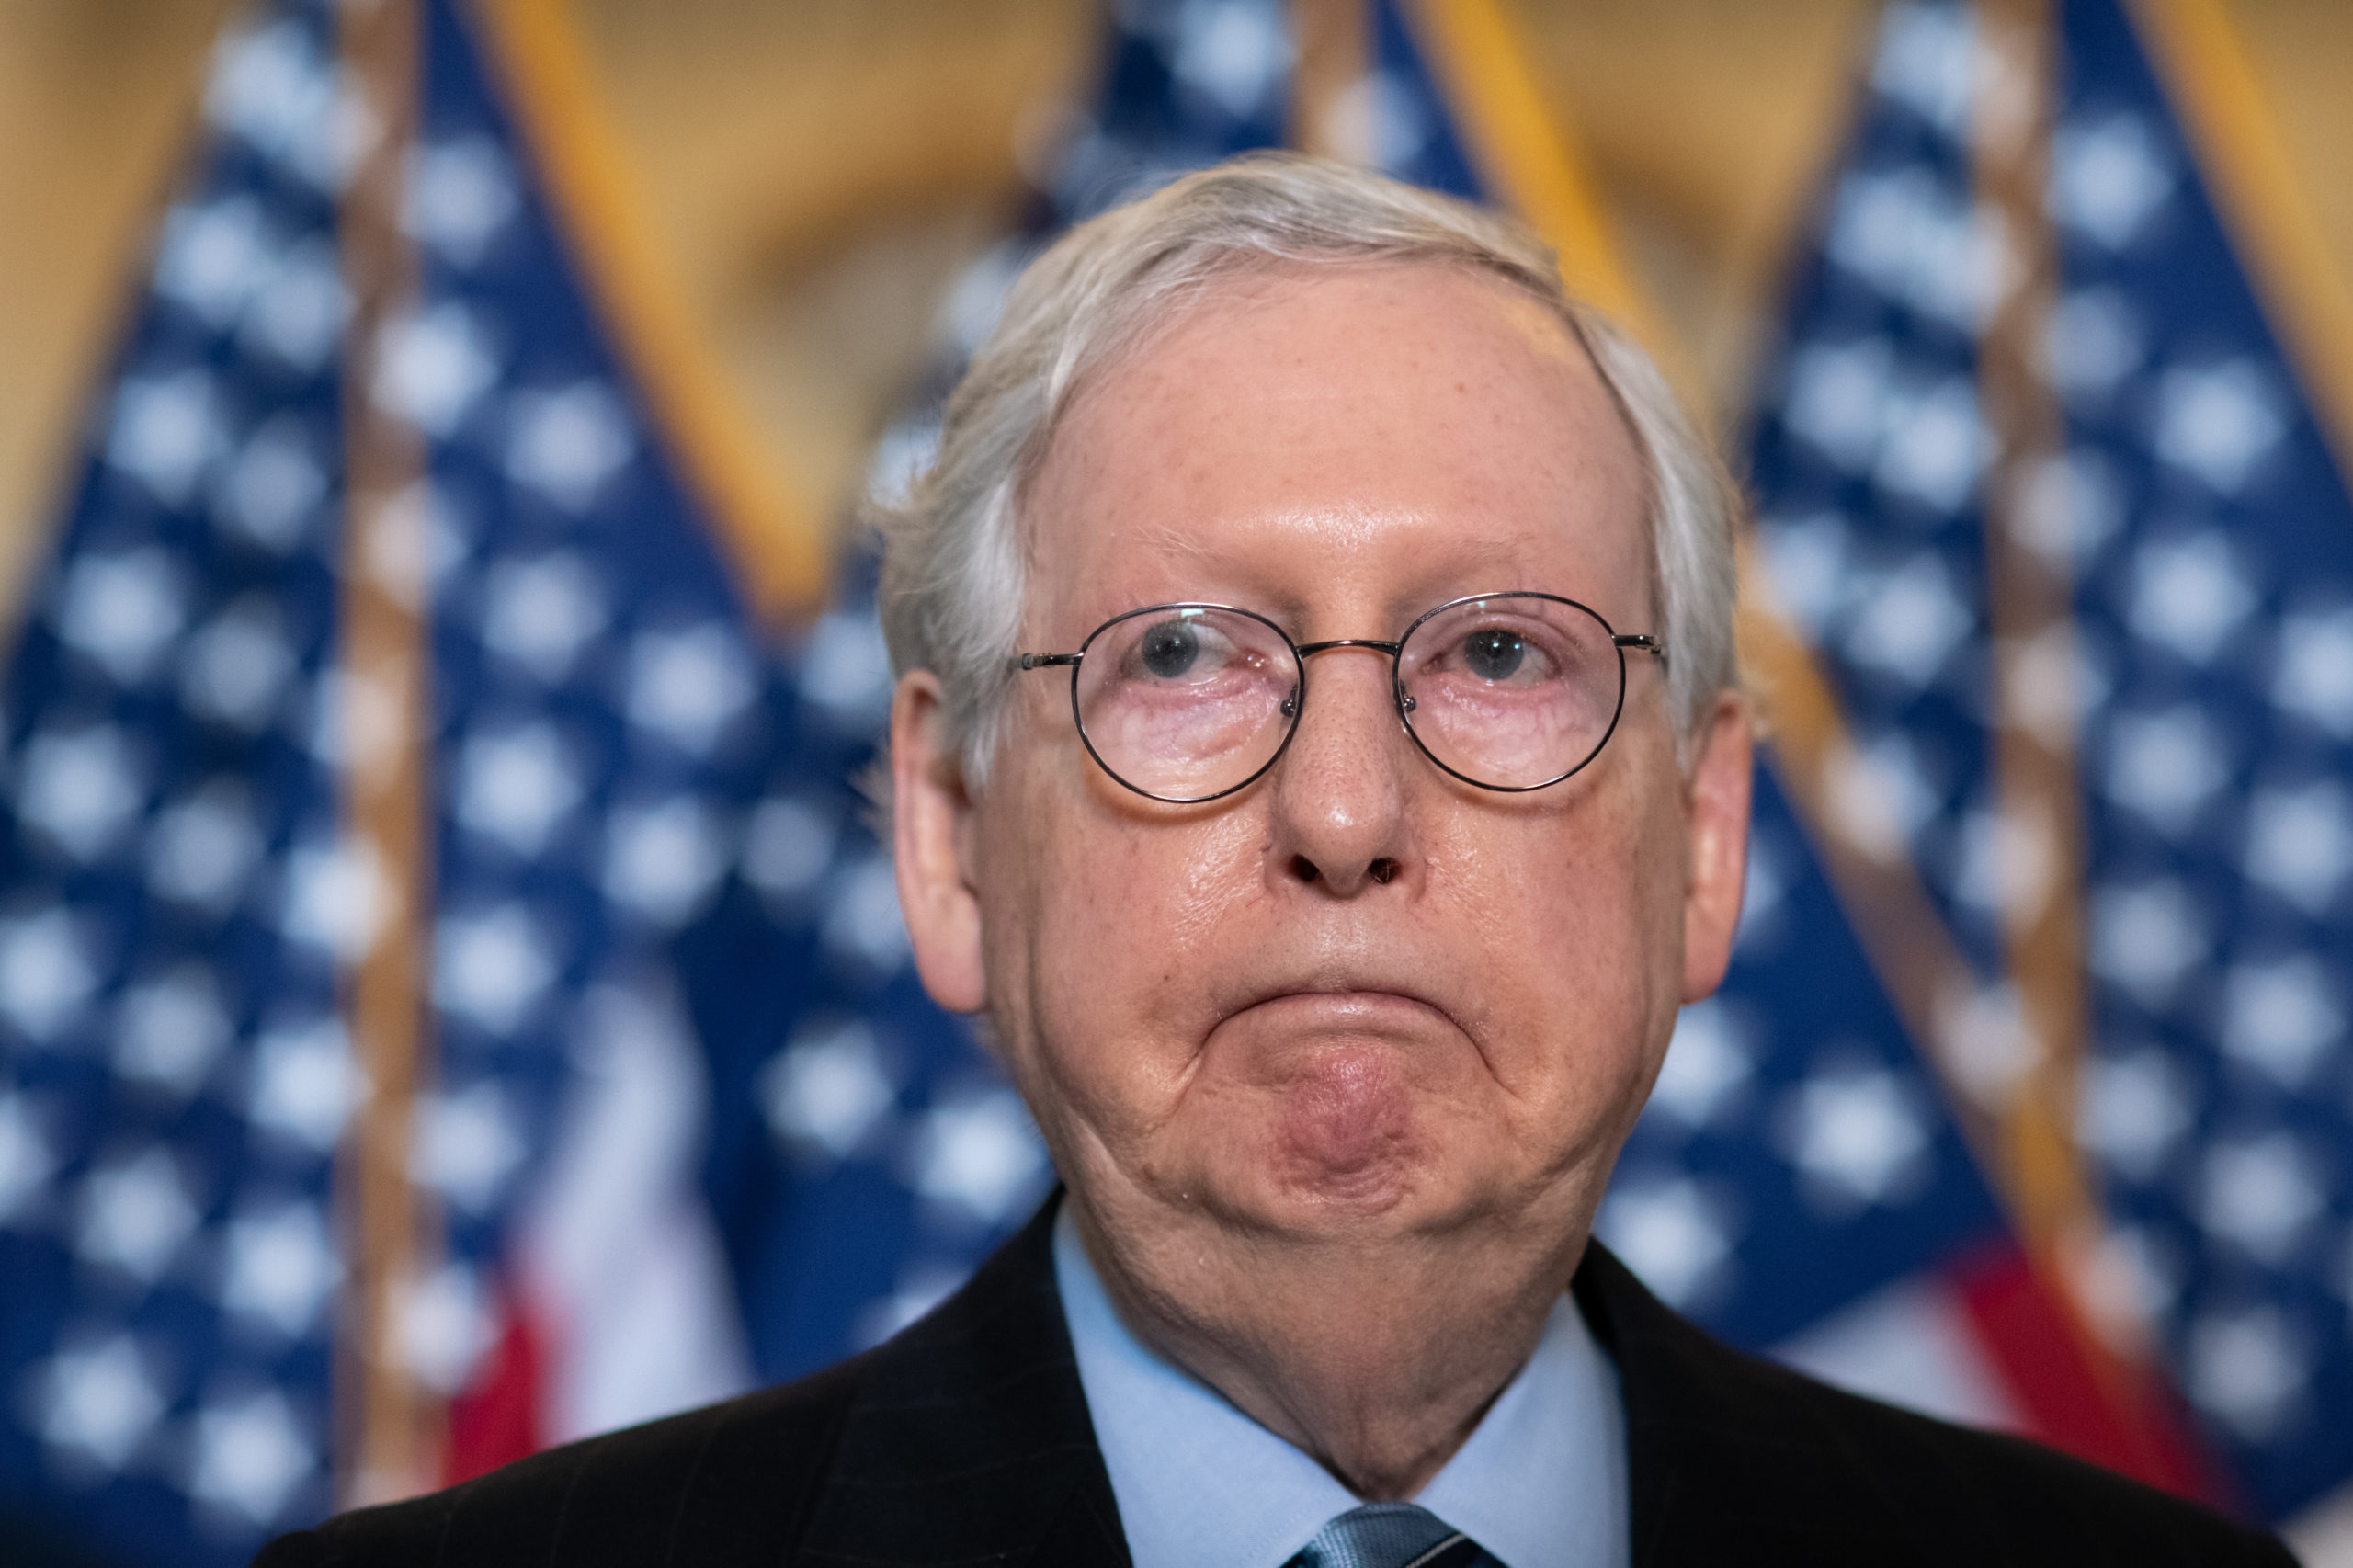 Mitch McConnell Says Voter Suppression Doesn’t Exist in Any US State